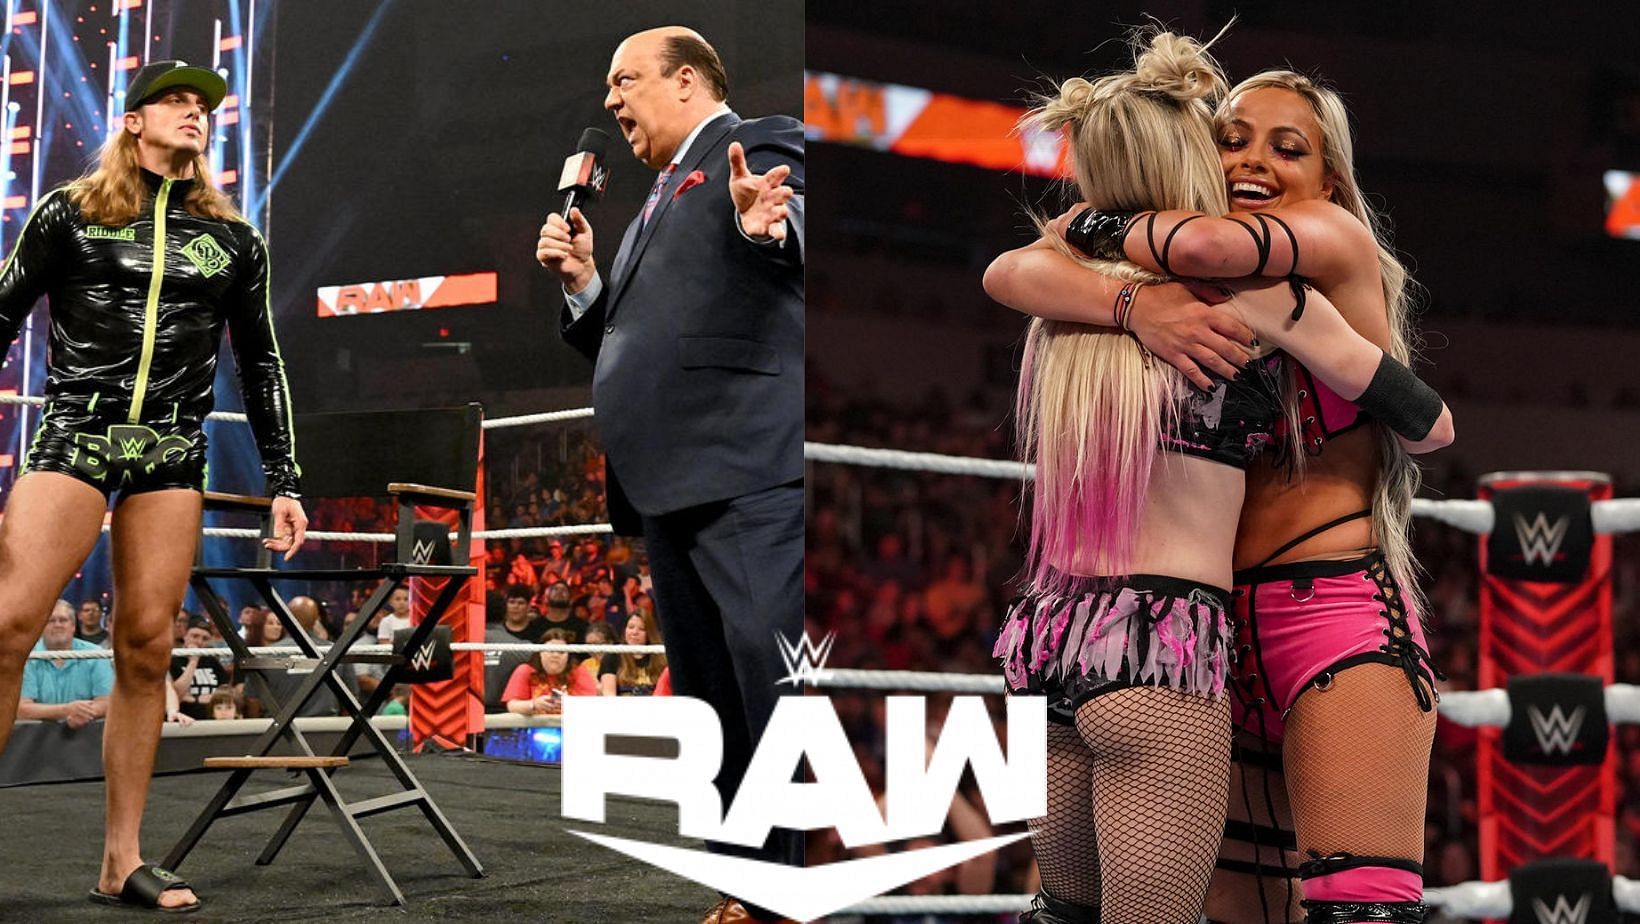 WWE RAW saw the build to Money in the Bank continue